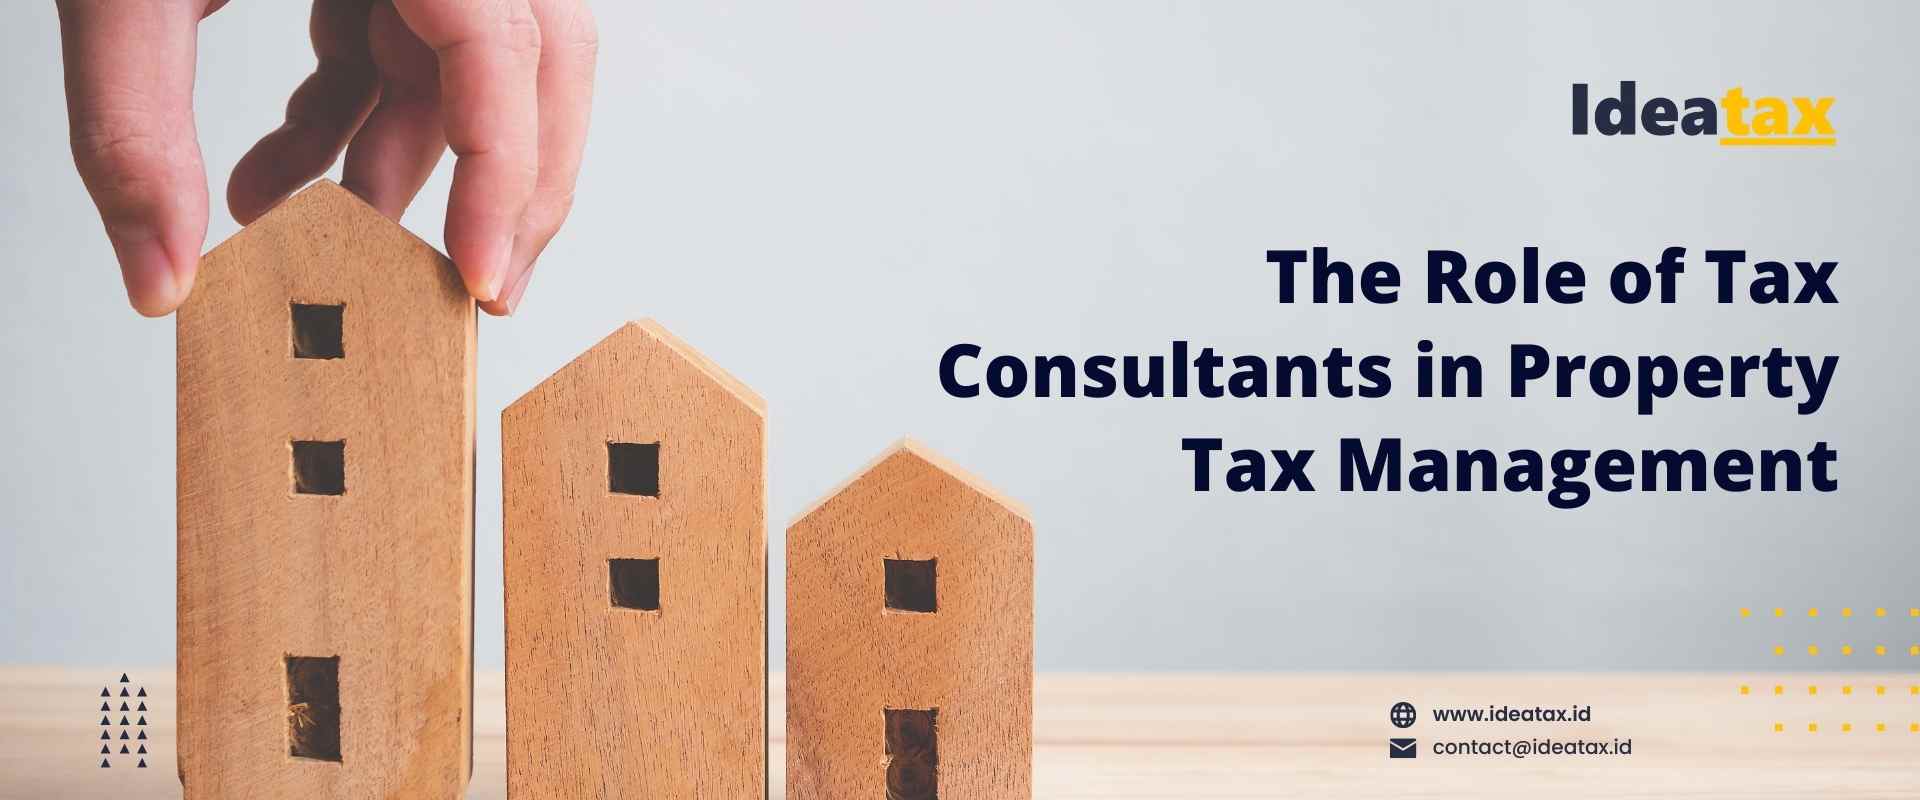 The Role of Tax Consultants in Property Tax Management